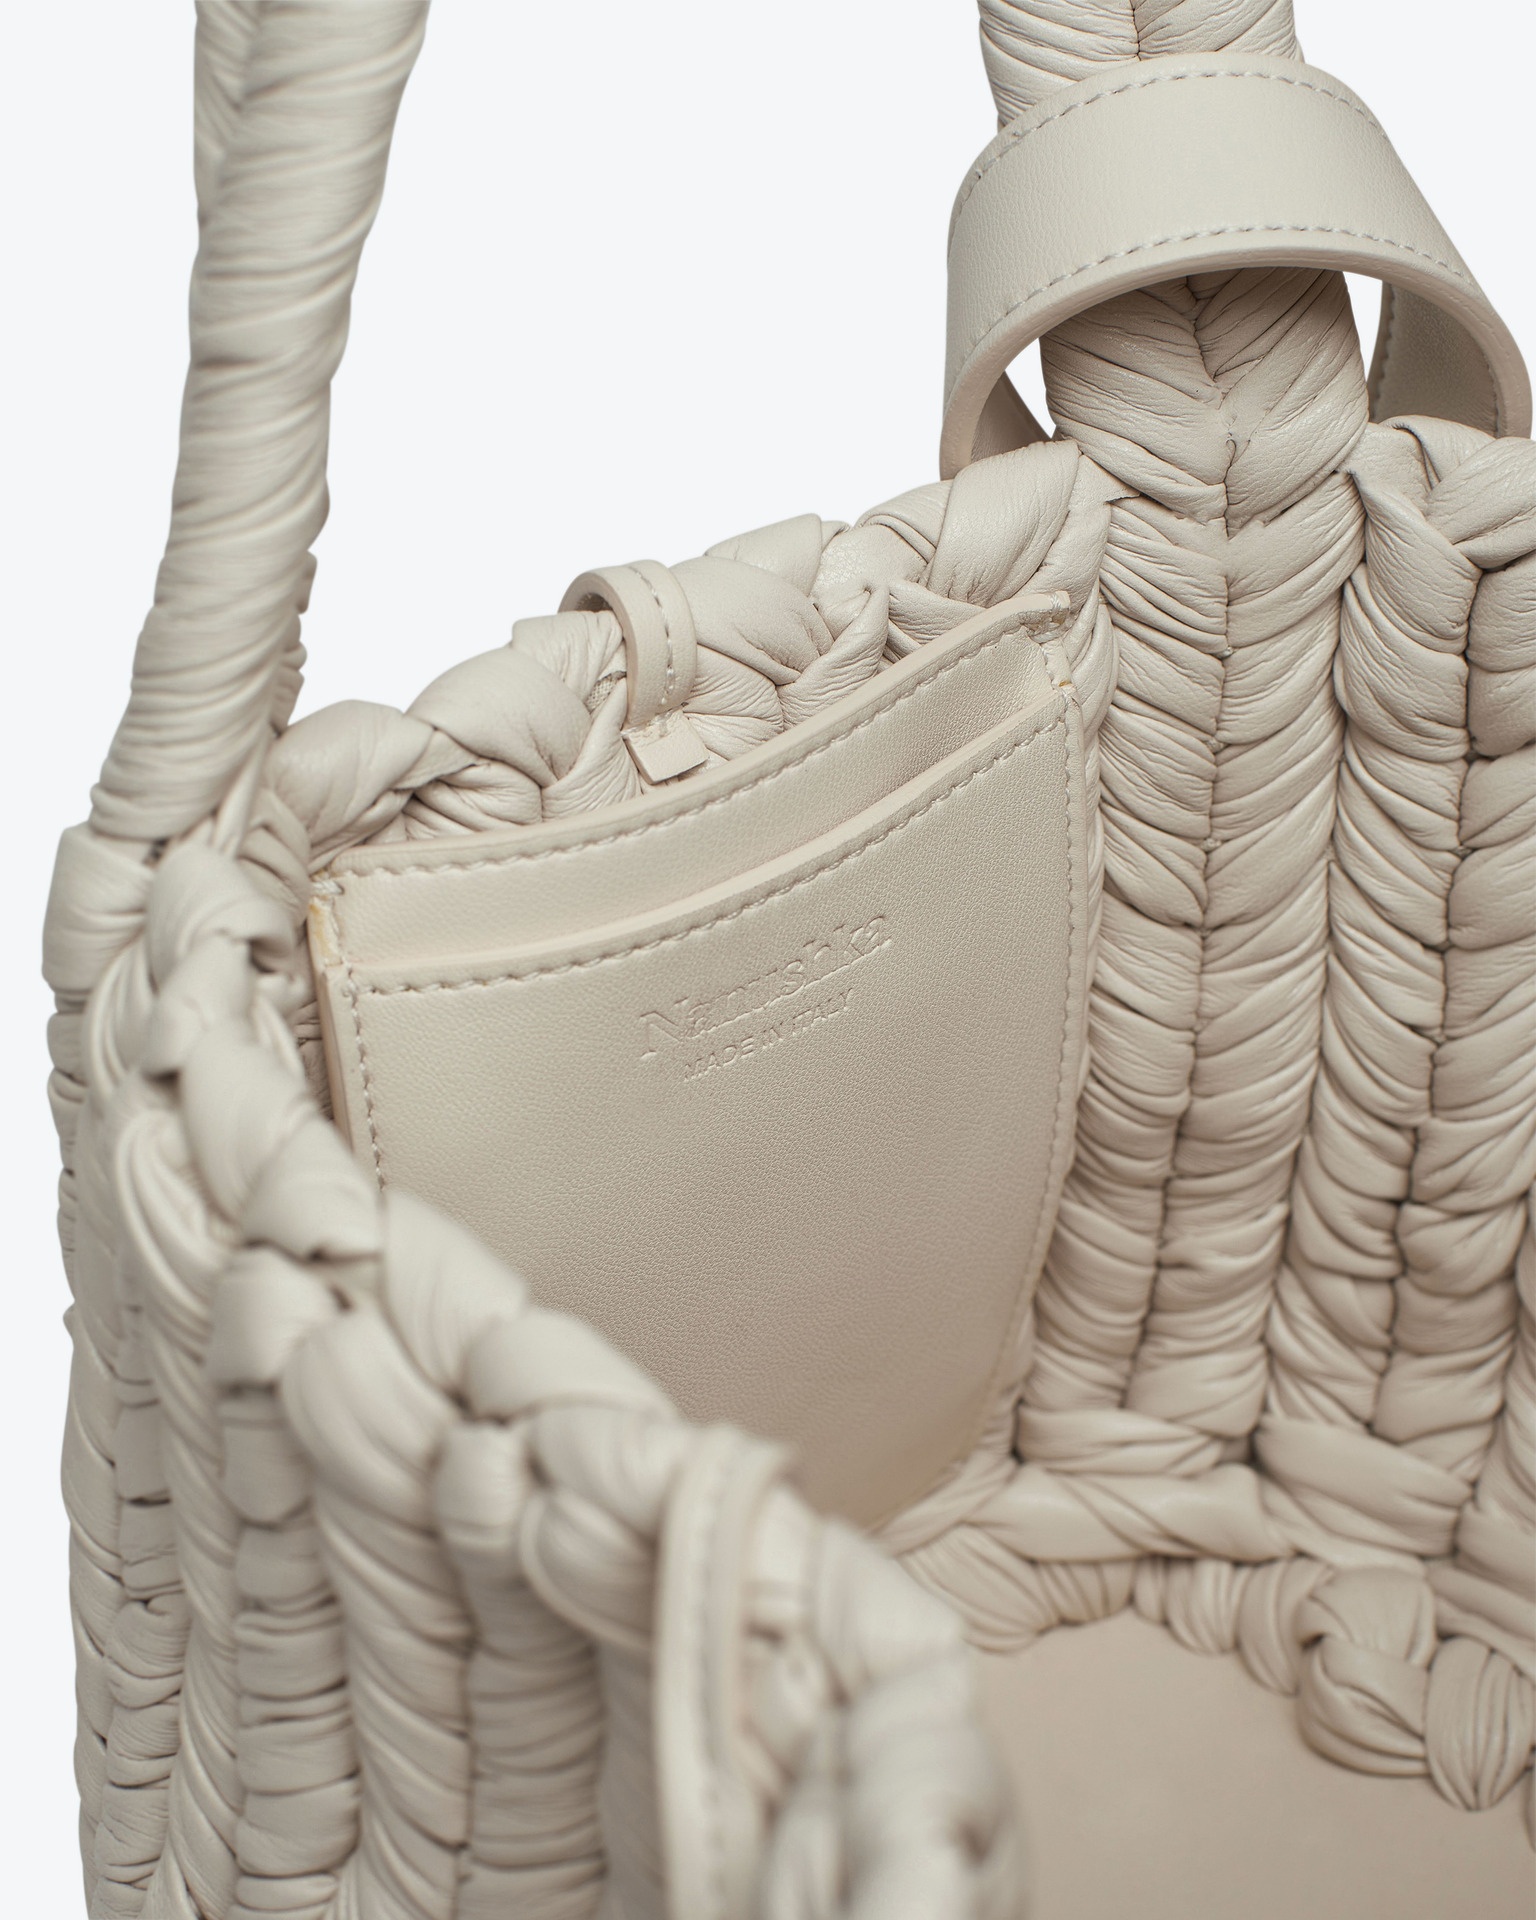 THE BUSKET - Knit bucket bag - Off white - 4